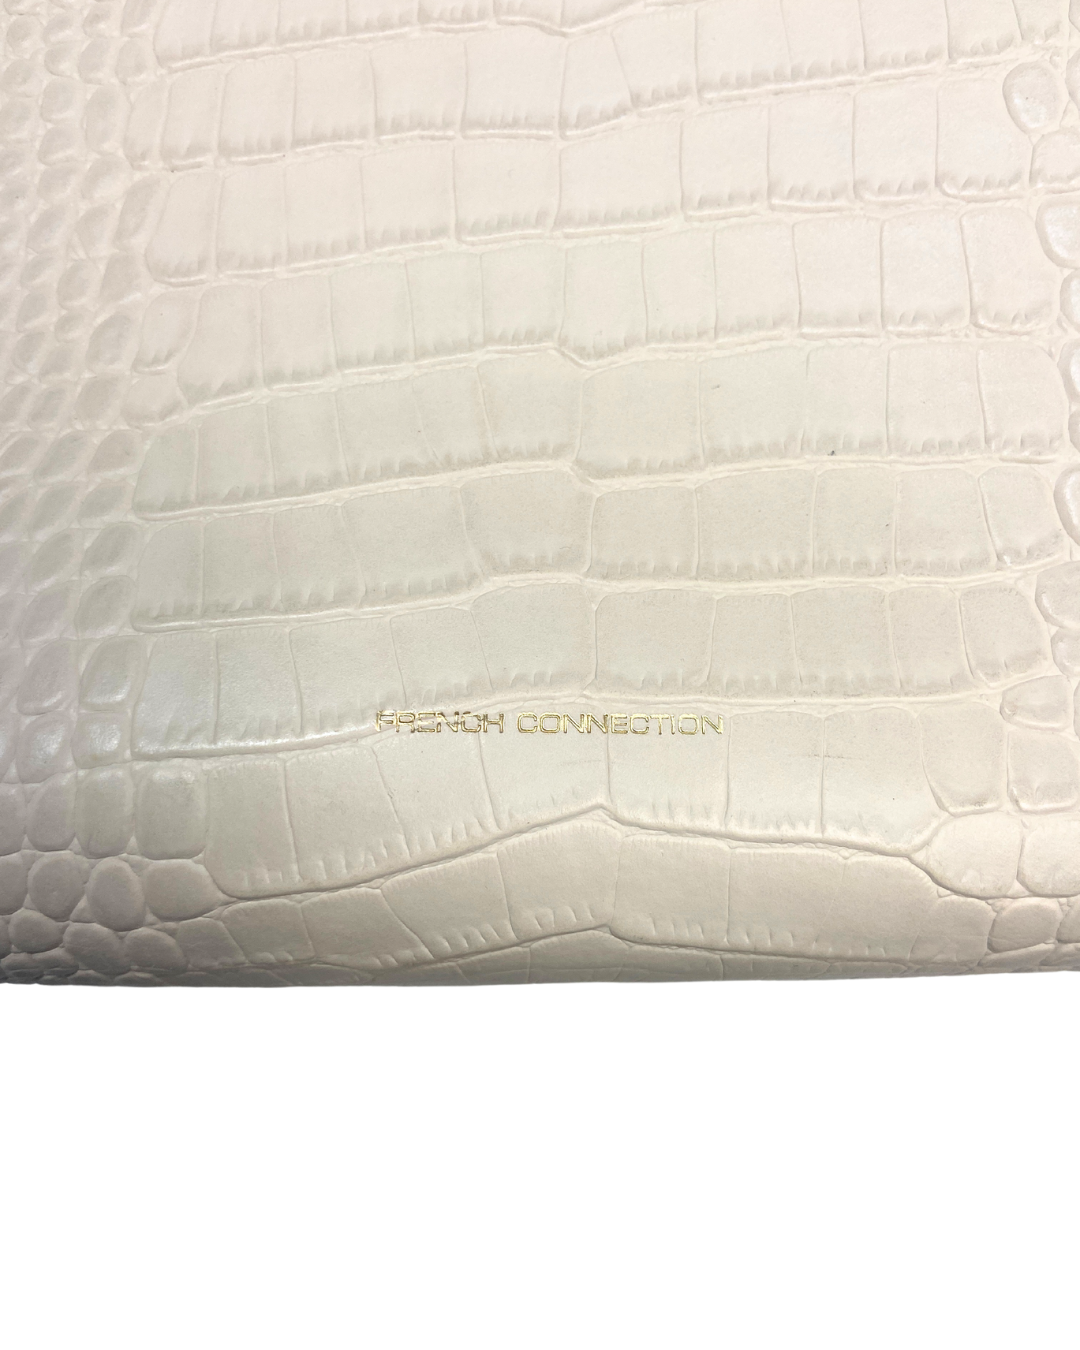 French Connection Off-White Croc-Embossed Tote Bag